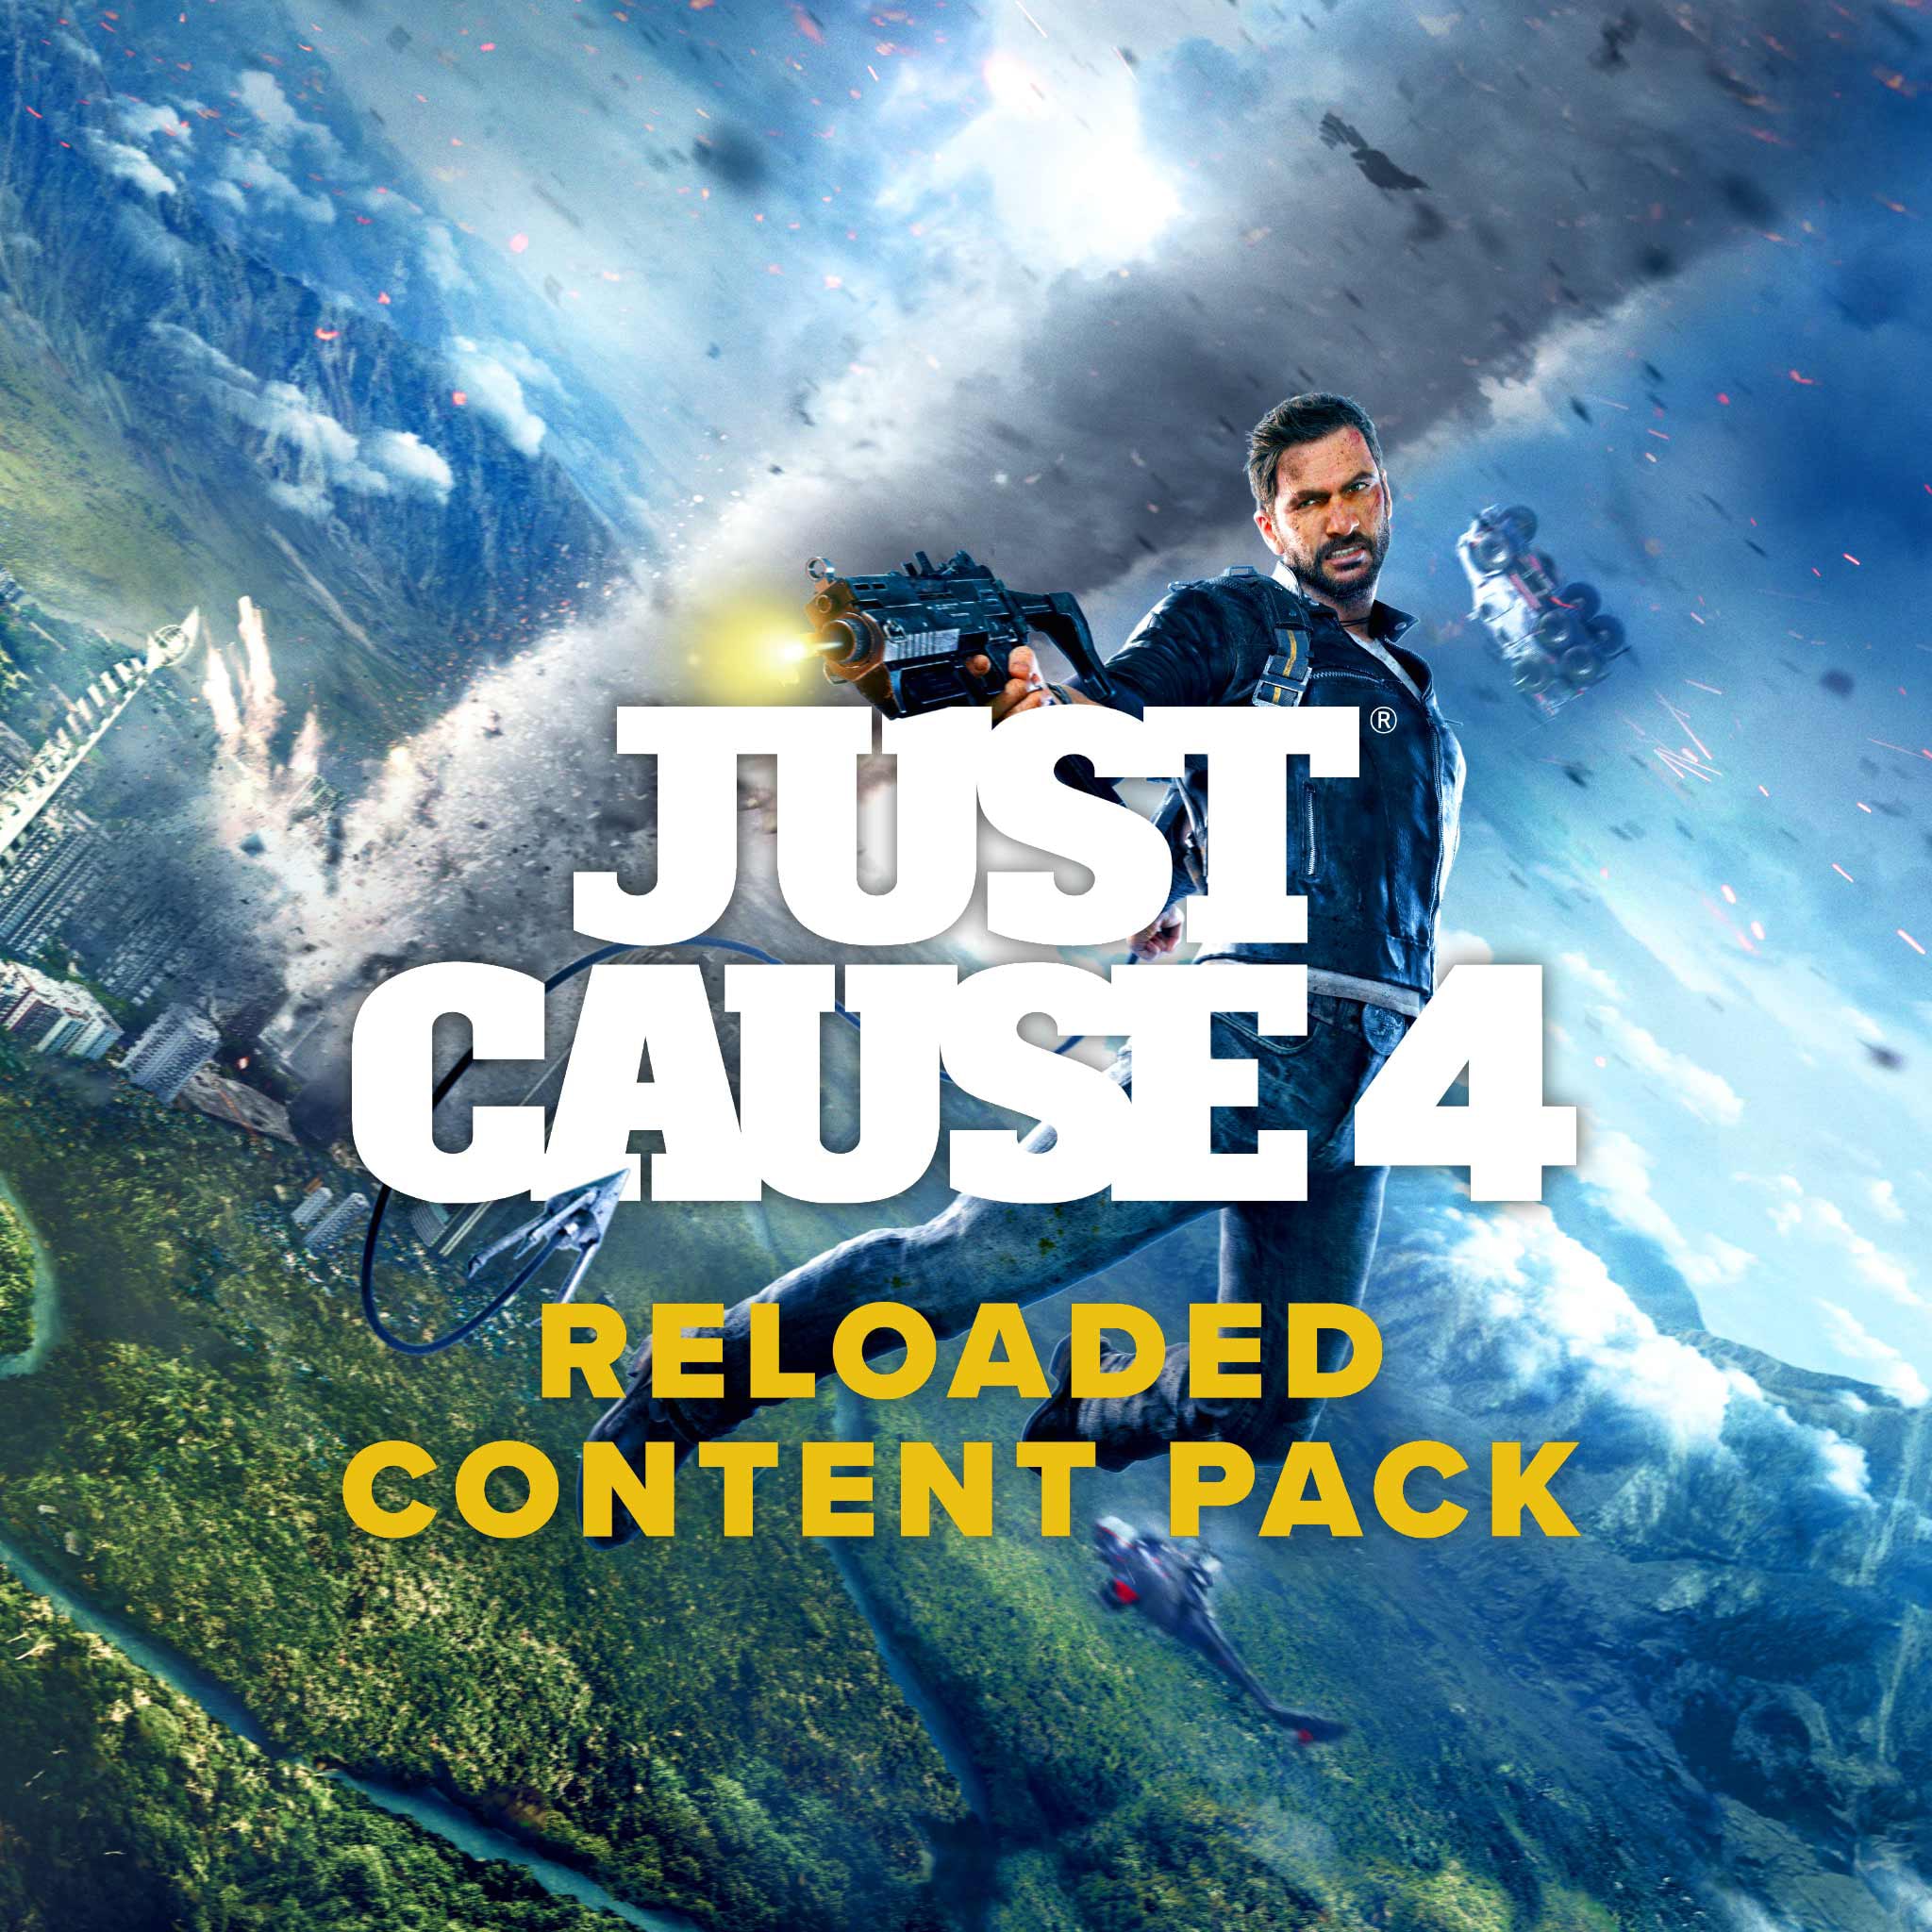 Just Cause 4 - Reloaded Content Pack